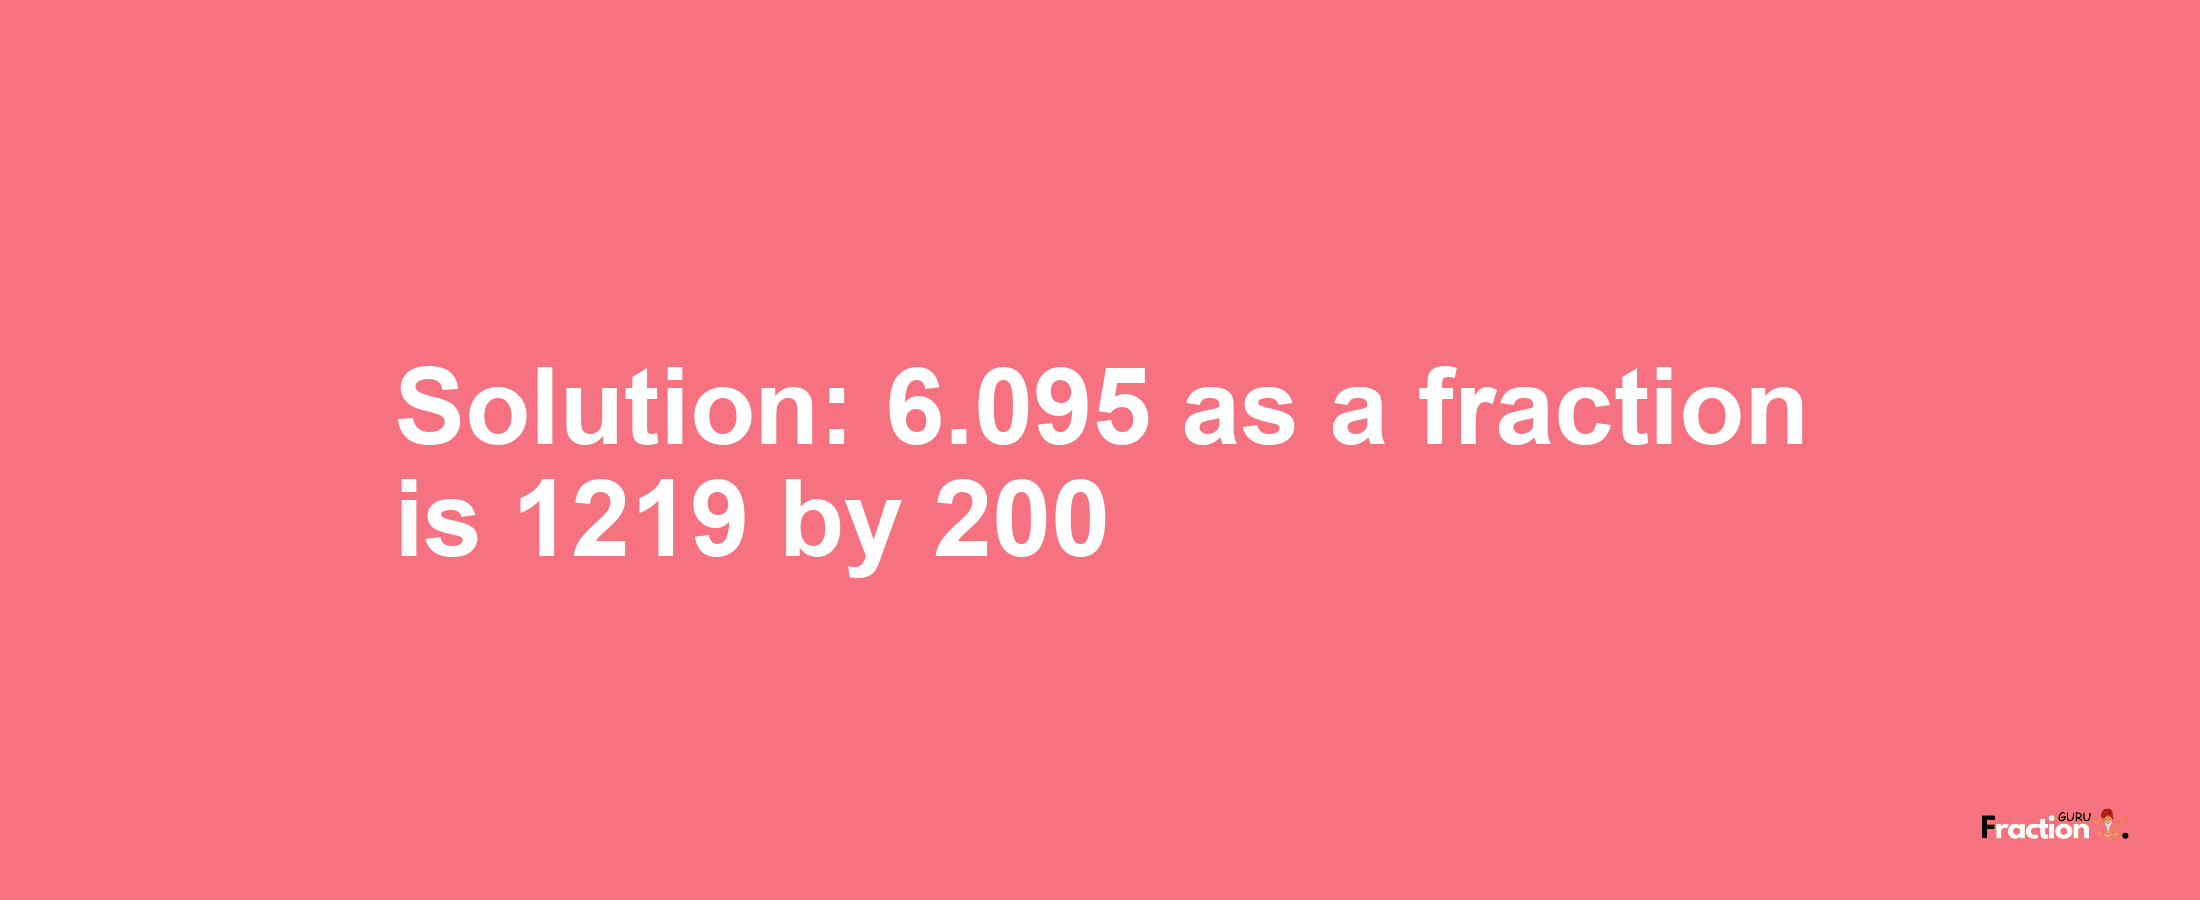 Solution:6.095 as a fraction is 1219/200